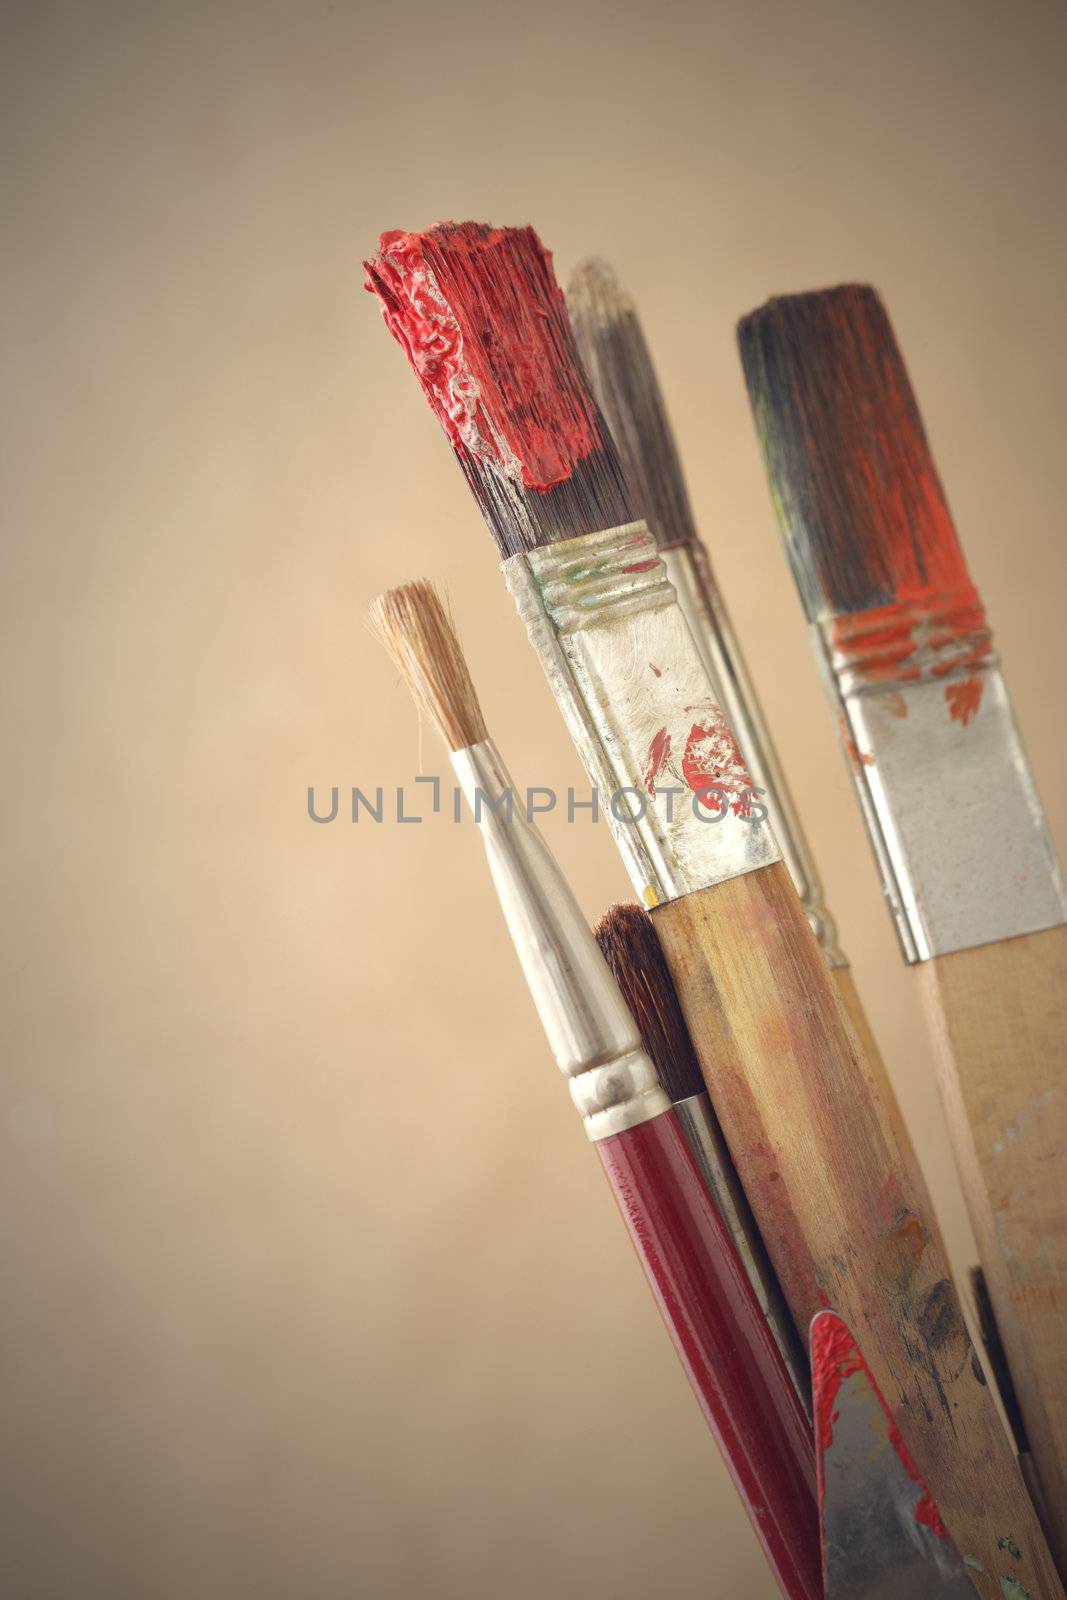 painter's brushes by stokkete